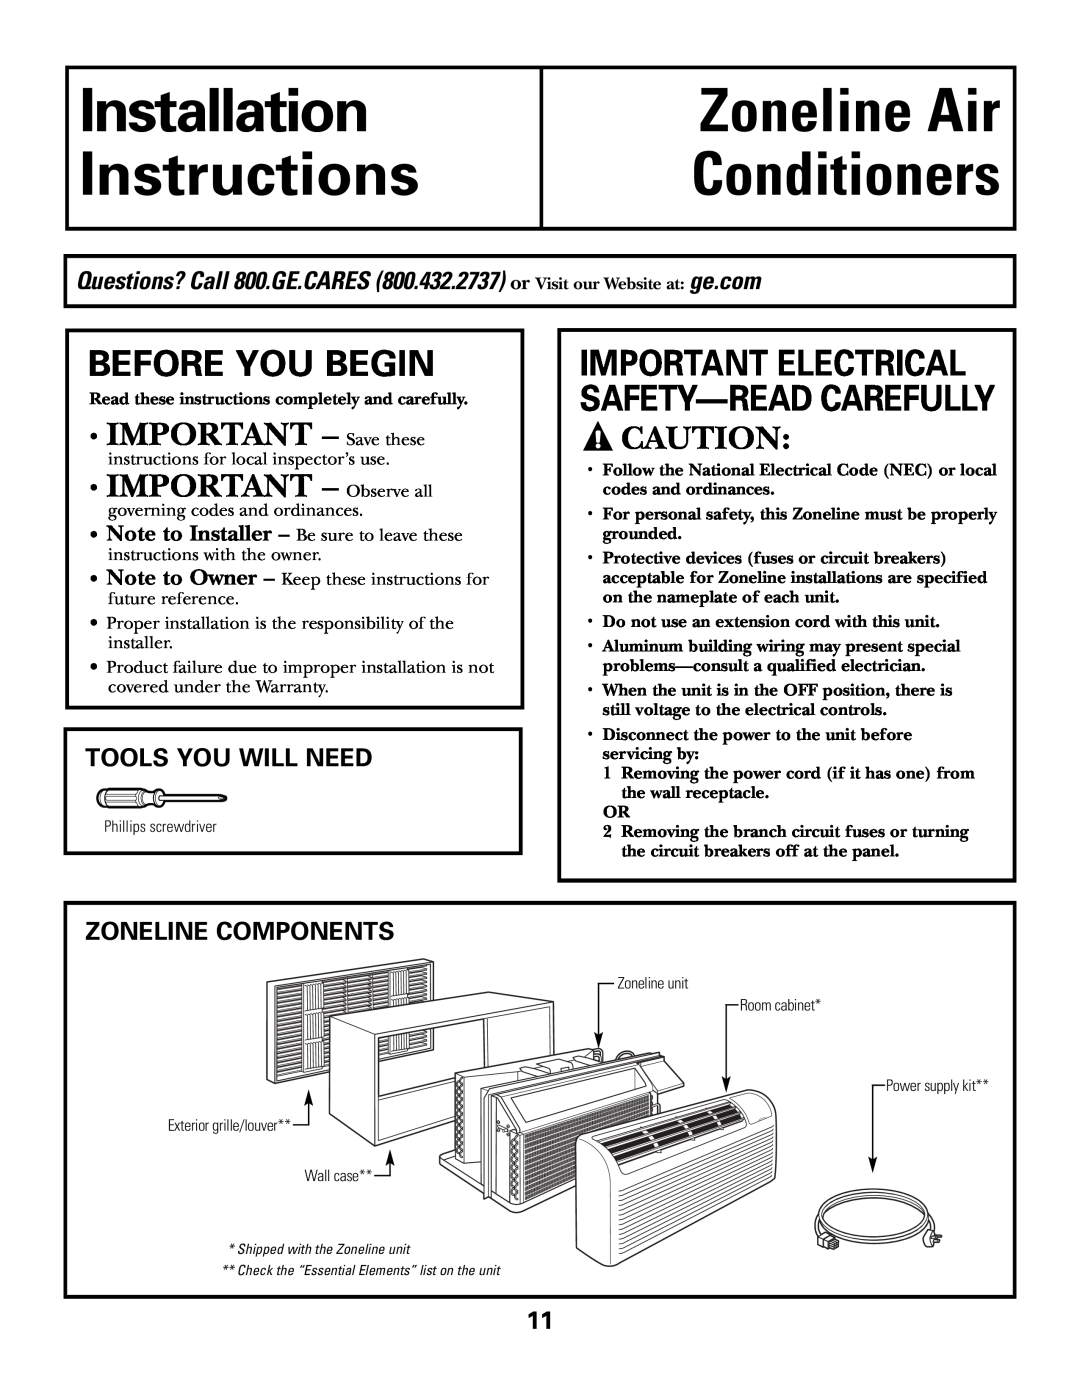 GE 2900 Before You Begin, Tools You Will Need, Zoneline Components, Installation Instructions, Zoneline Air Conditioners 